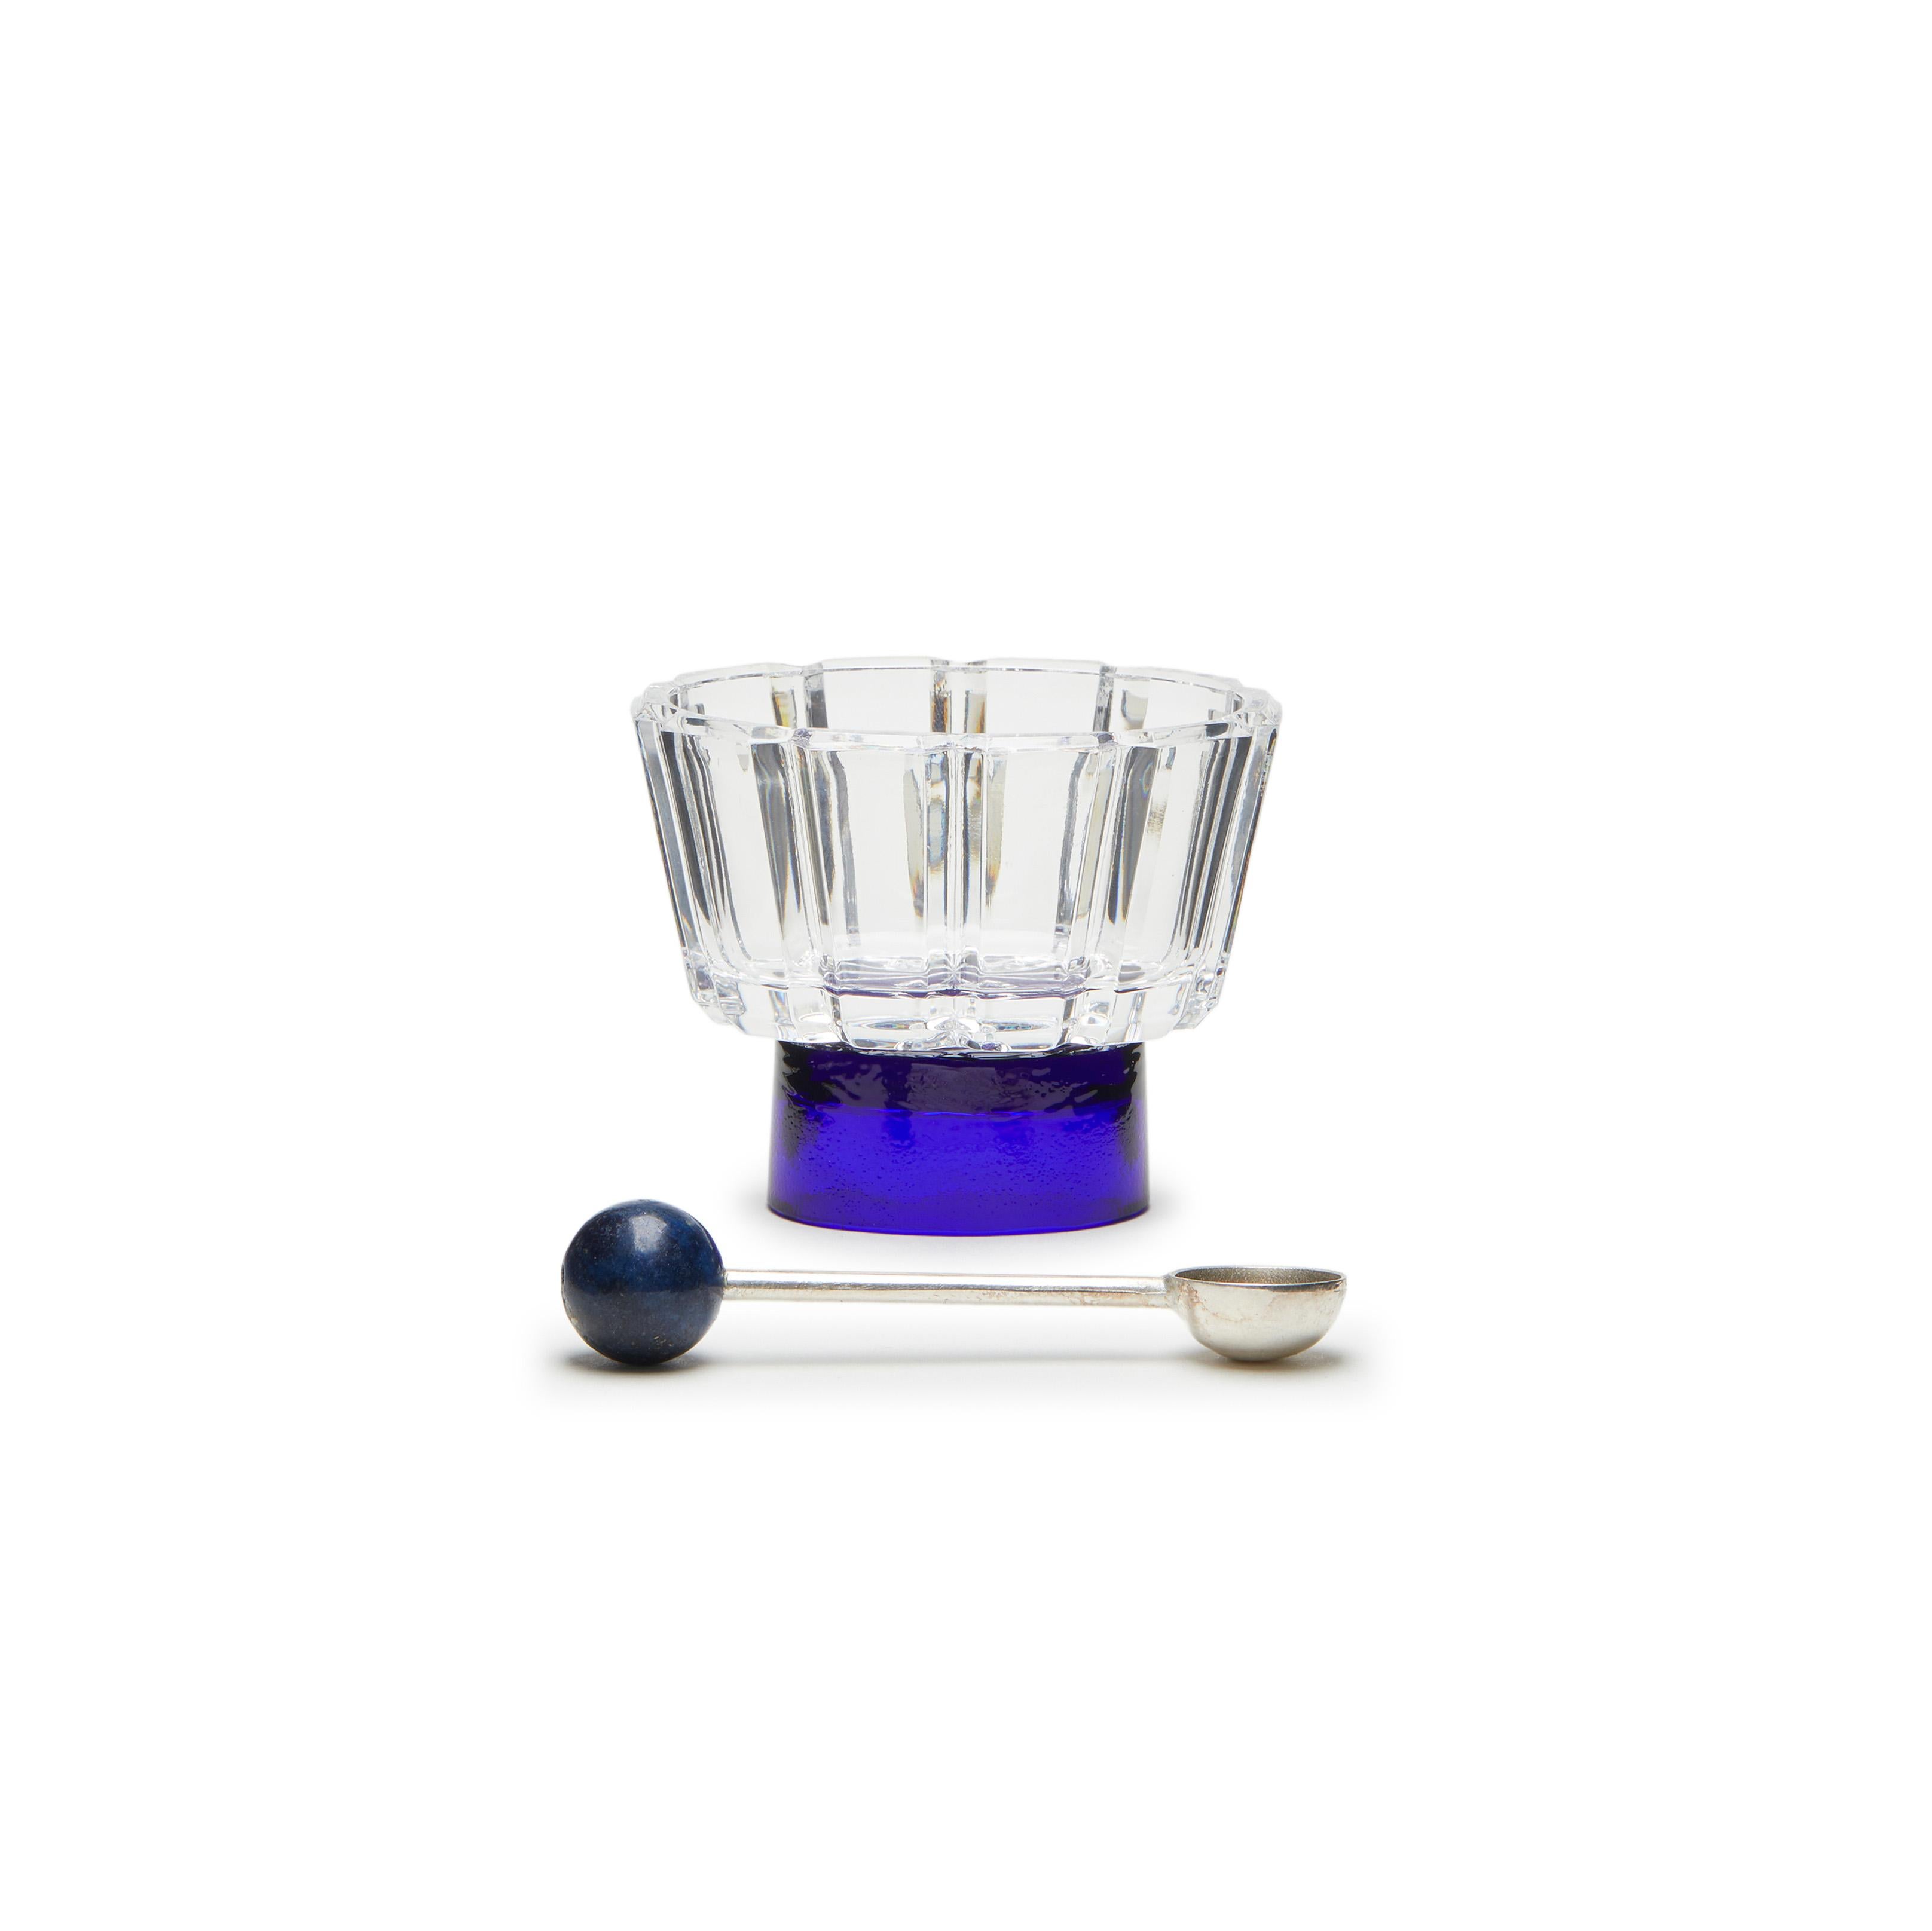 Add sophistication to your table with the diamantino salt cellar from Natalia Criado.  each vessel is crafted from repurposed crystal, sourced from glassmakers in Tuscany.  The practice of recontextualizing these materials breathes new life into